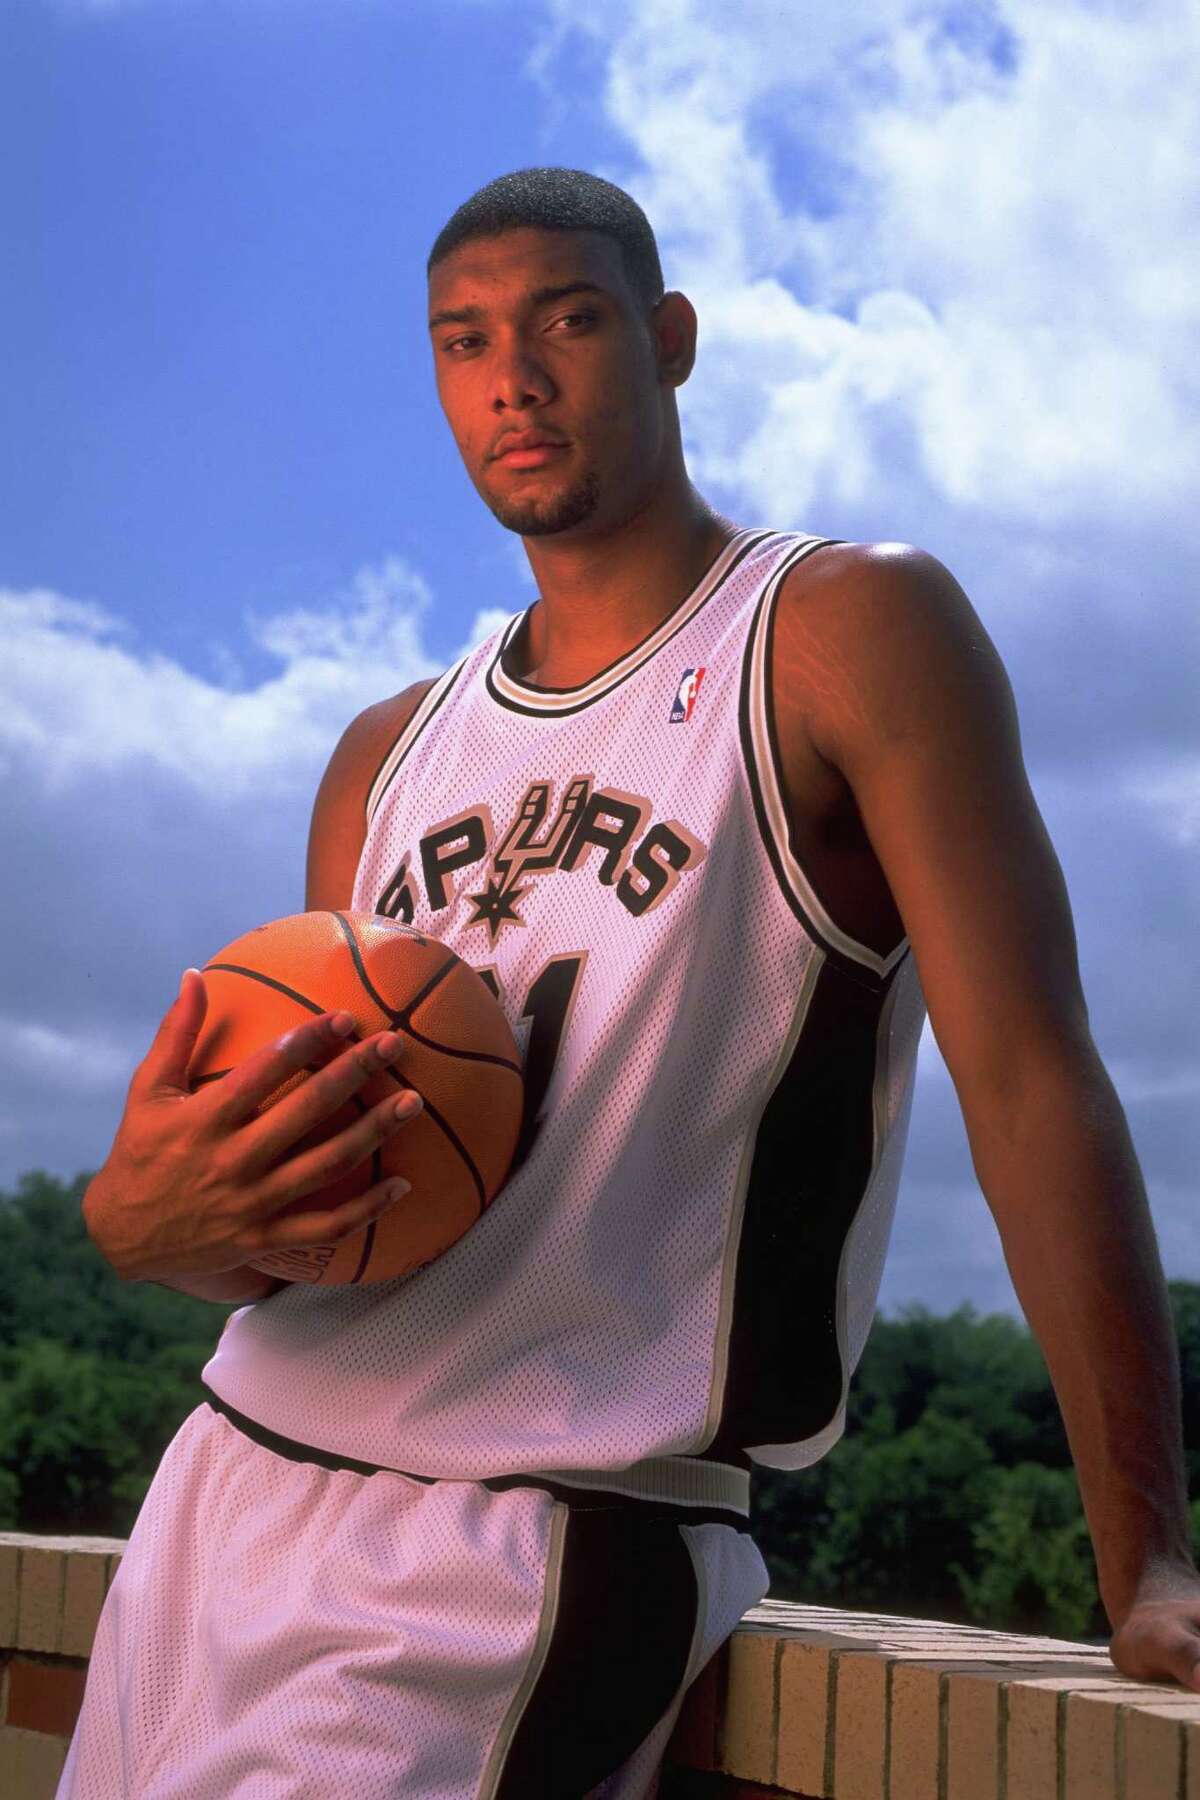 NBA Basketball -San Antonio Spurs forward Tim Duncan is shown in a June 27, 1997 portrait. Duncan, out of Wake Forest, was the No. 1 overall pick in the 1997 NBA Draft.